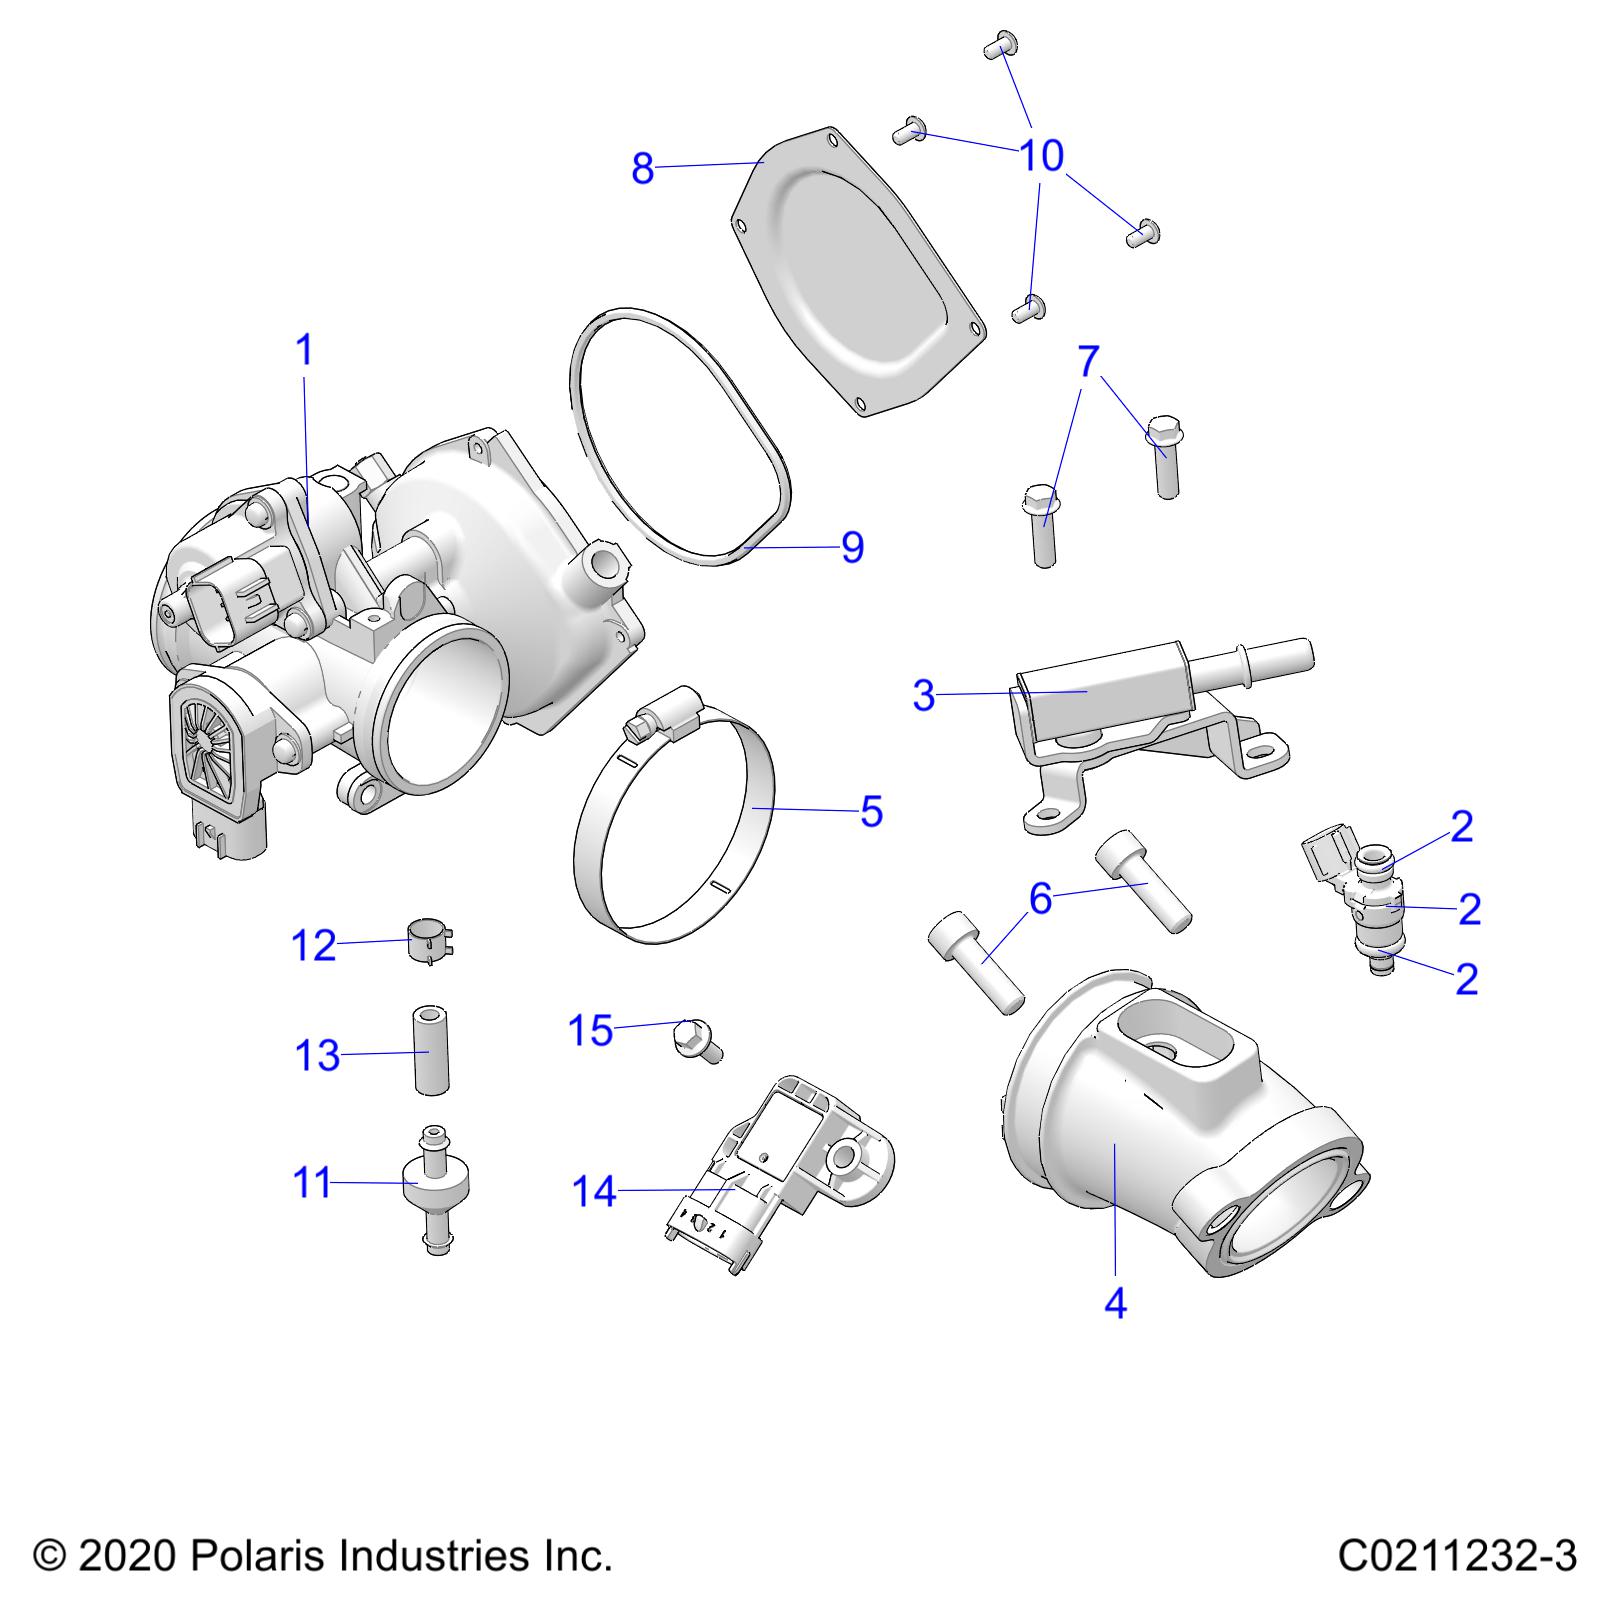 Part Number : 5259059 COVER-THROTTLE BODY